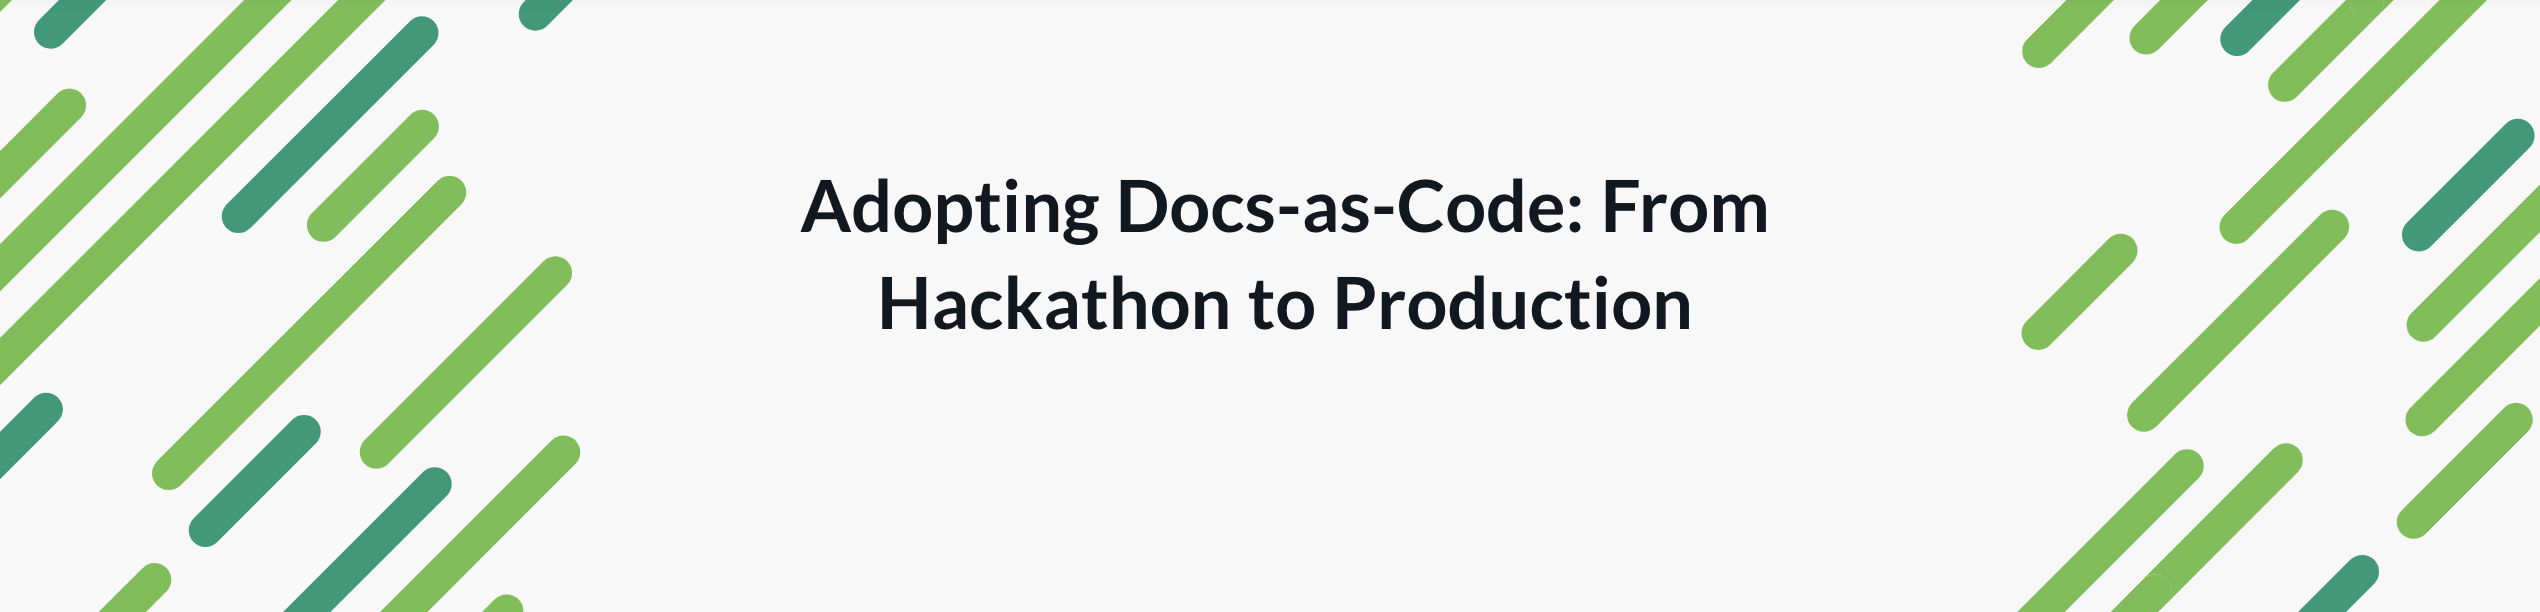 Adopting Docs-as-Code: From Hackathon to Production